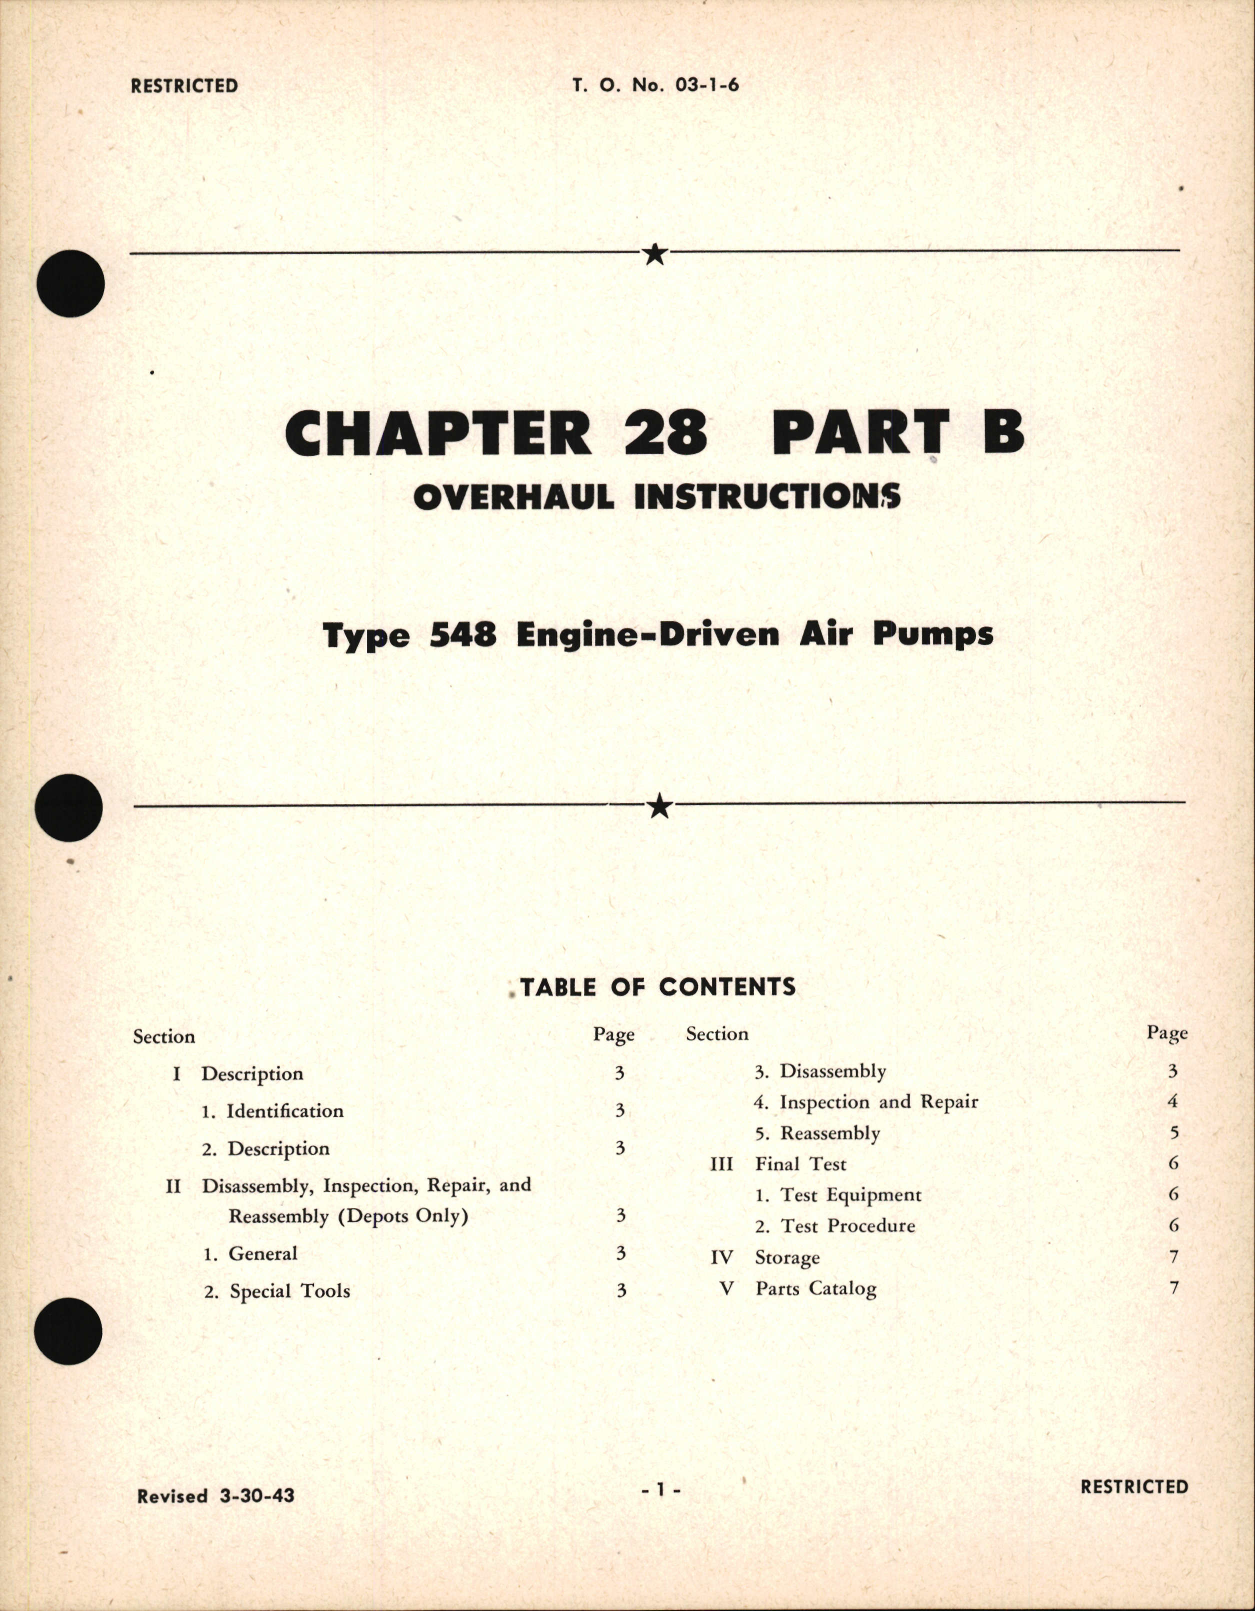 Sample page 1 from AirCorps Library document: Overhaul Instructions for Engine Driven Air Pumps Type 548